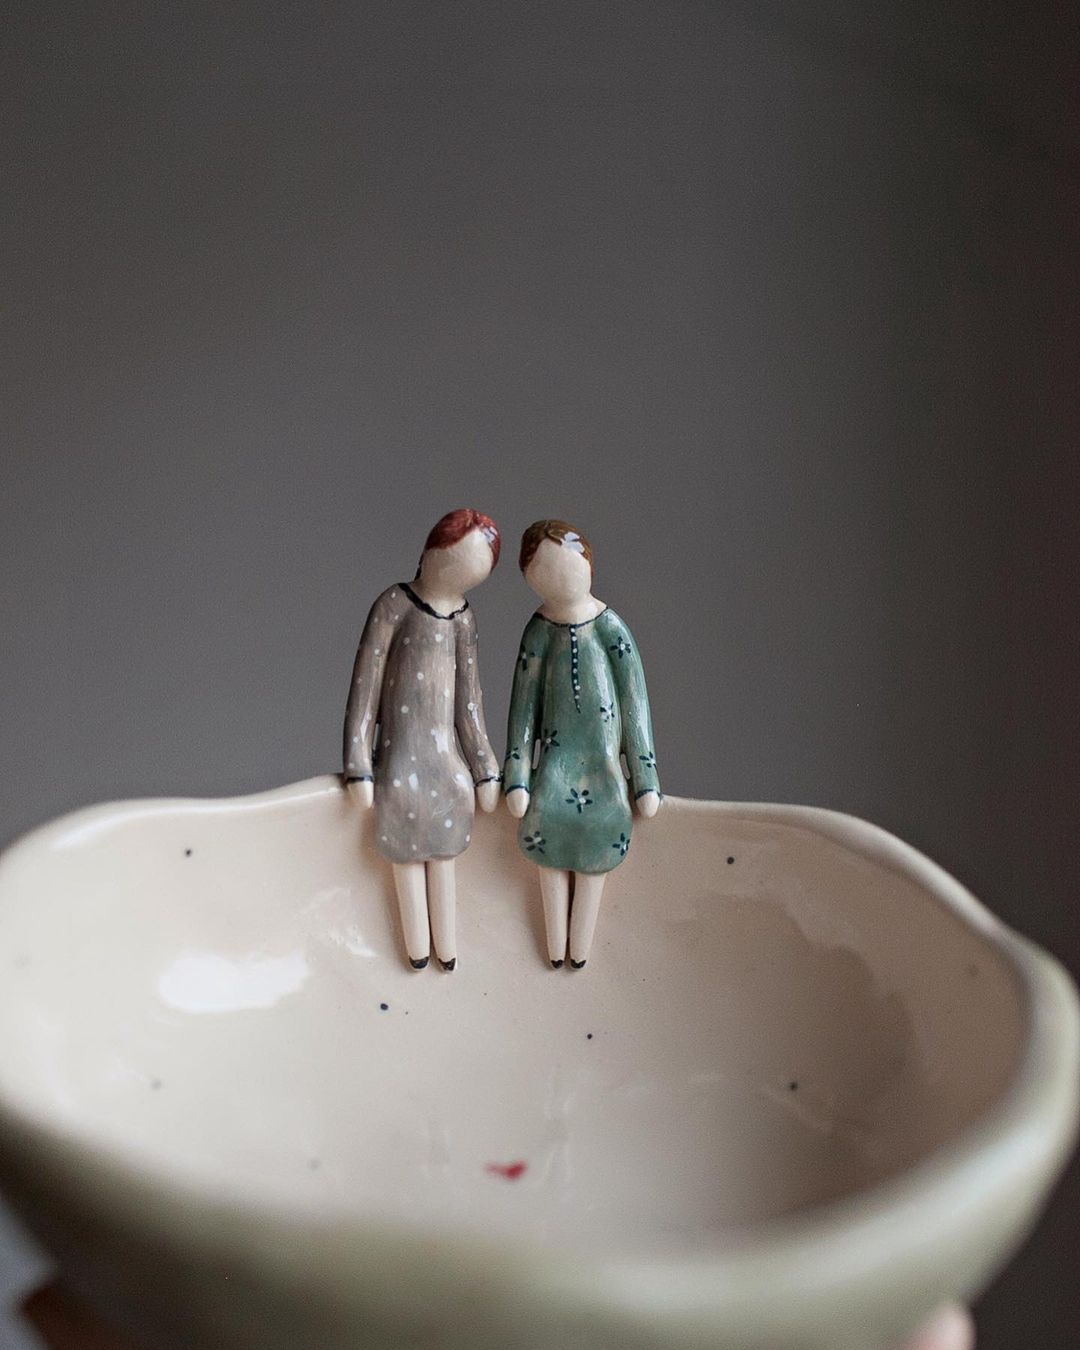 Delicate Ceramics Decorated With Lovely Figure Sculptures By Nadya And Olga (12)